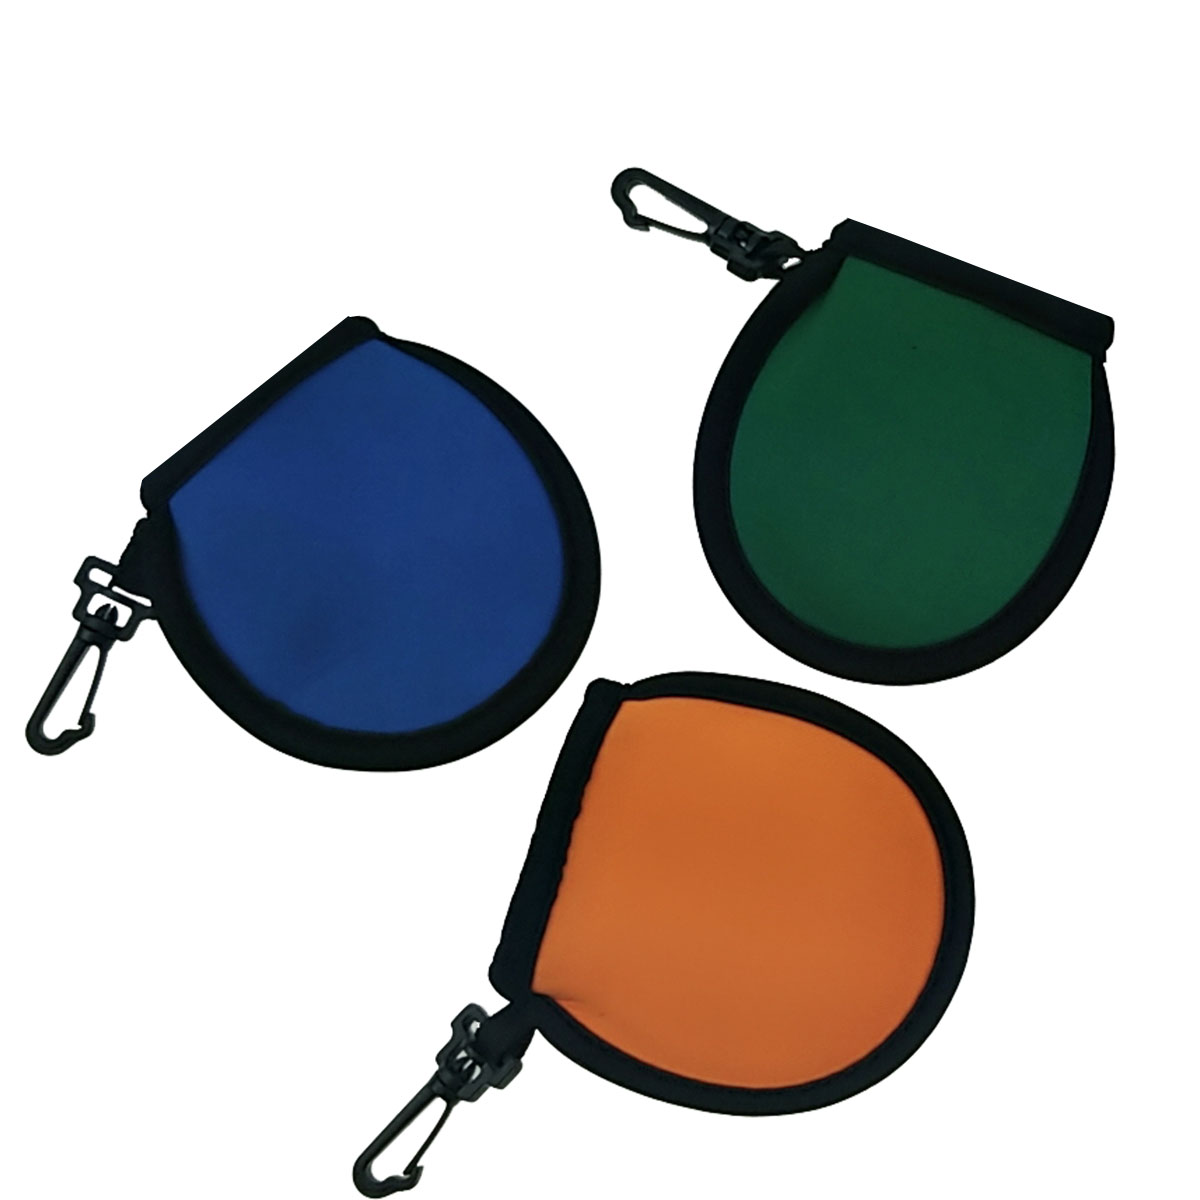 GL-AAD1026 Waterproof Pocket Golf Ball Cleaning Pouch